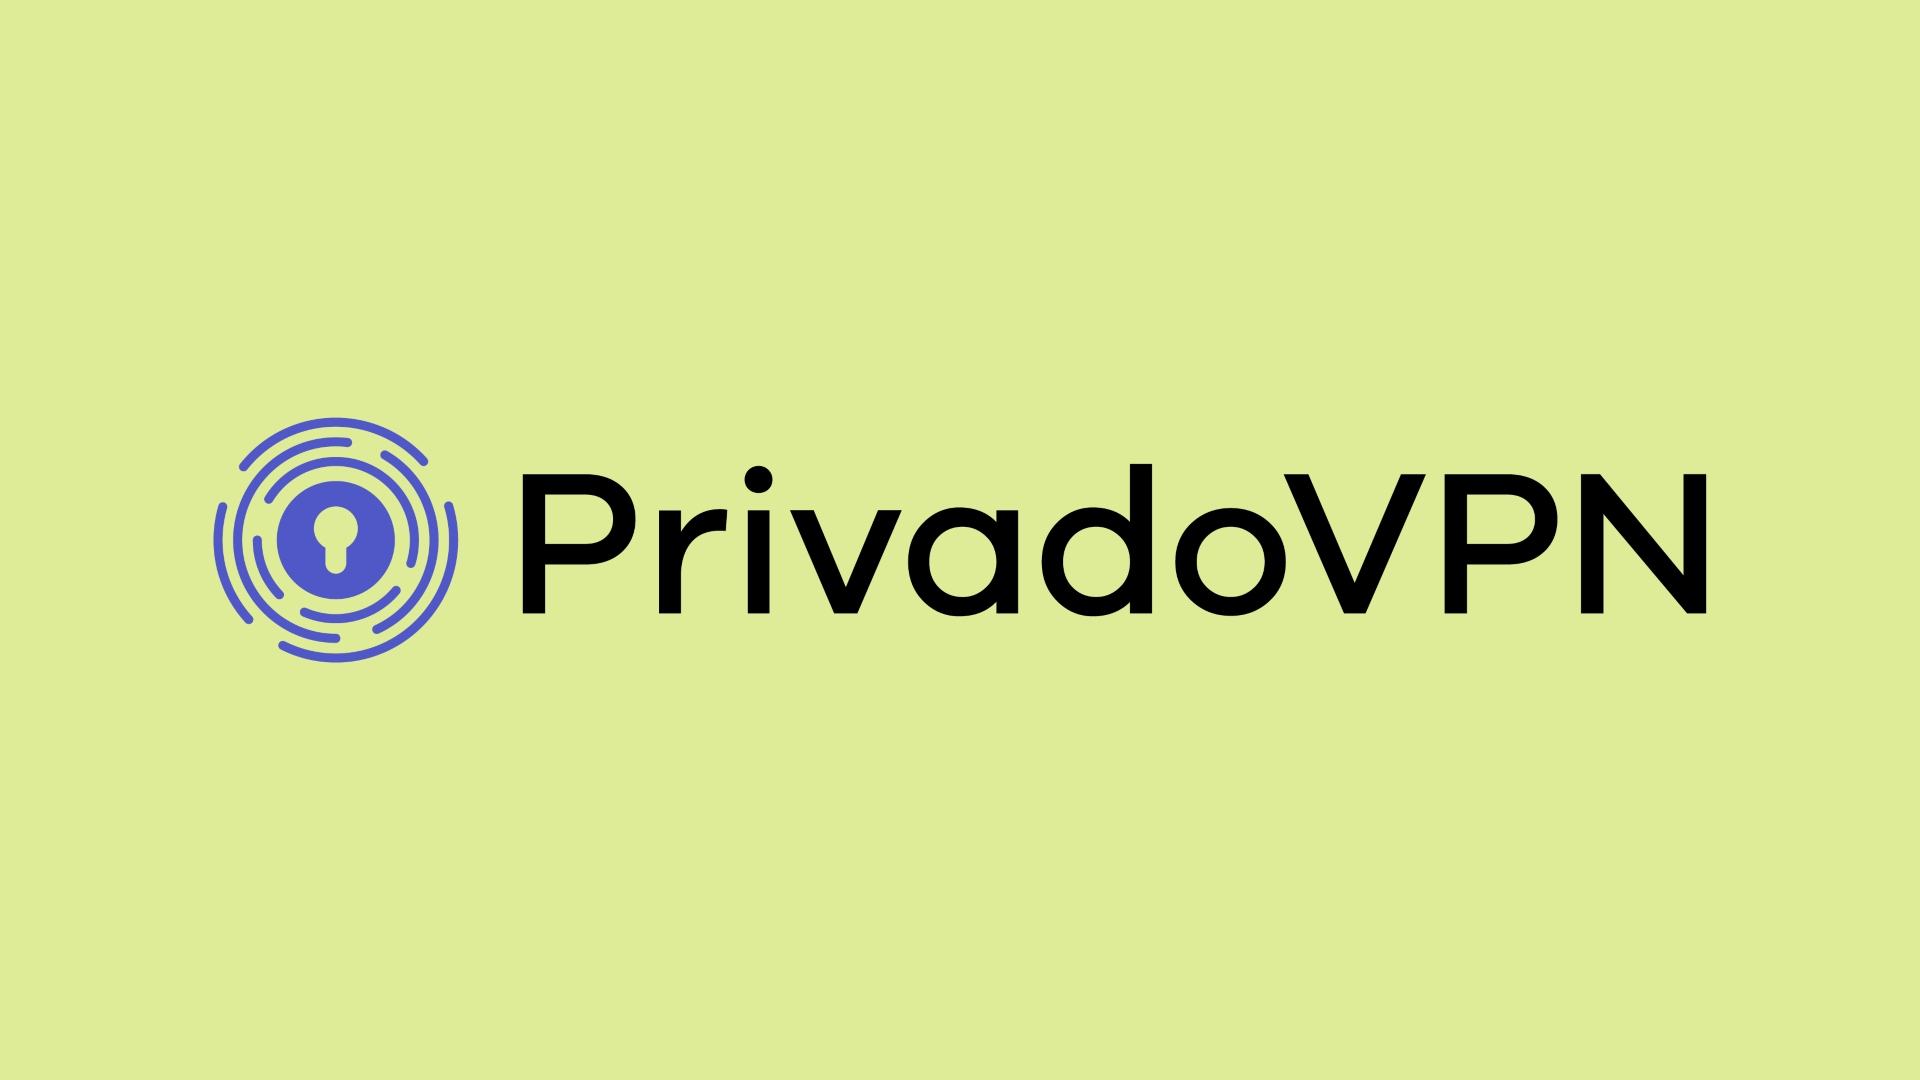 Best VPN for Xbox - PrivadoVPN. Image shows the company's logo.